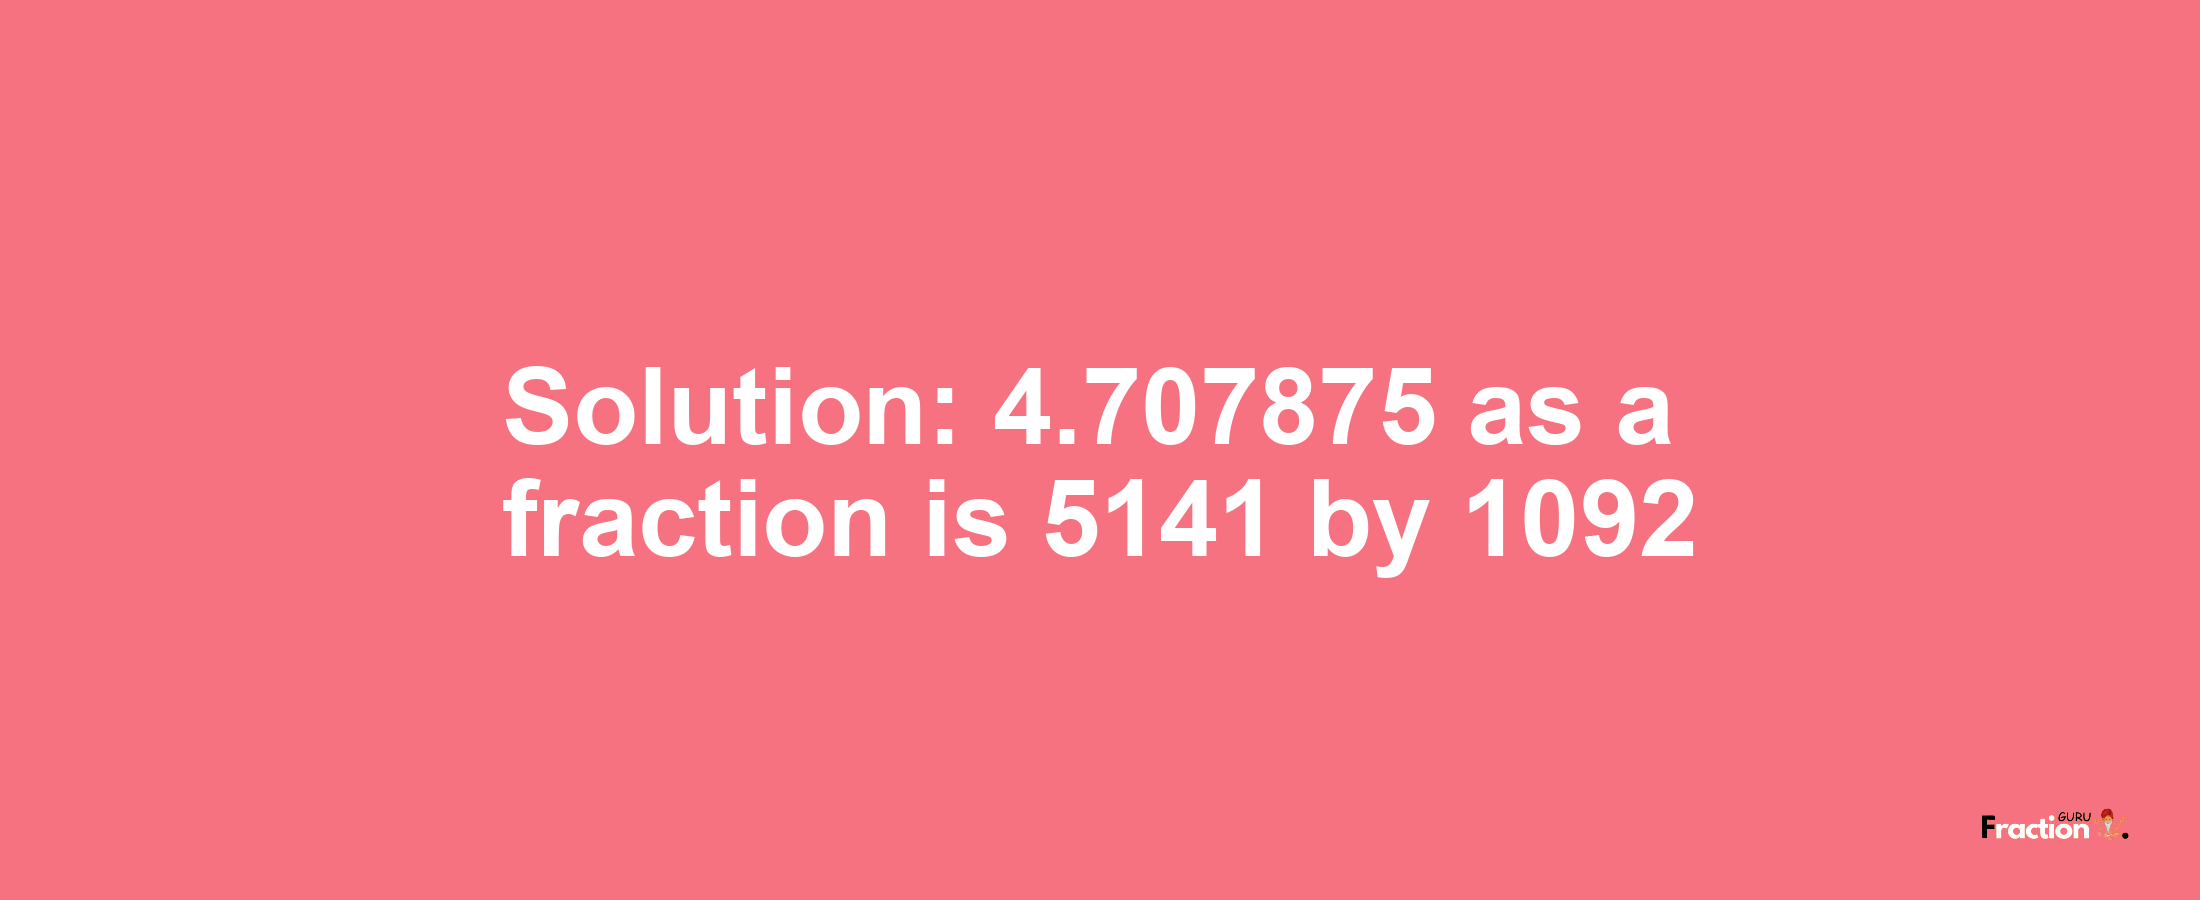 Solution:4.707875 as a fraction is 5141/1092